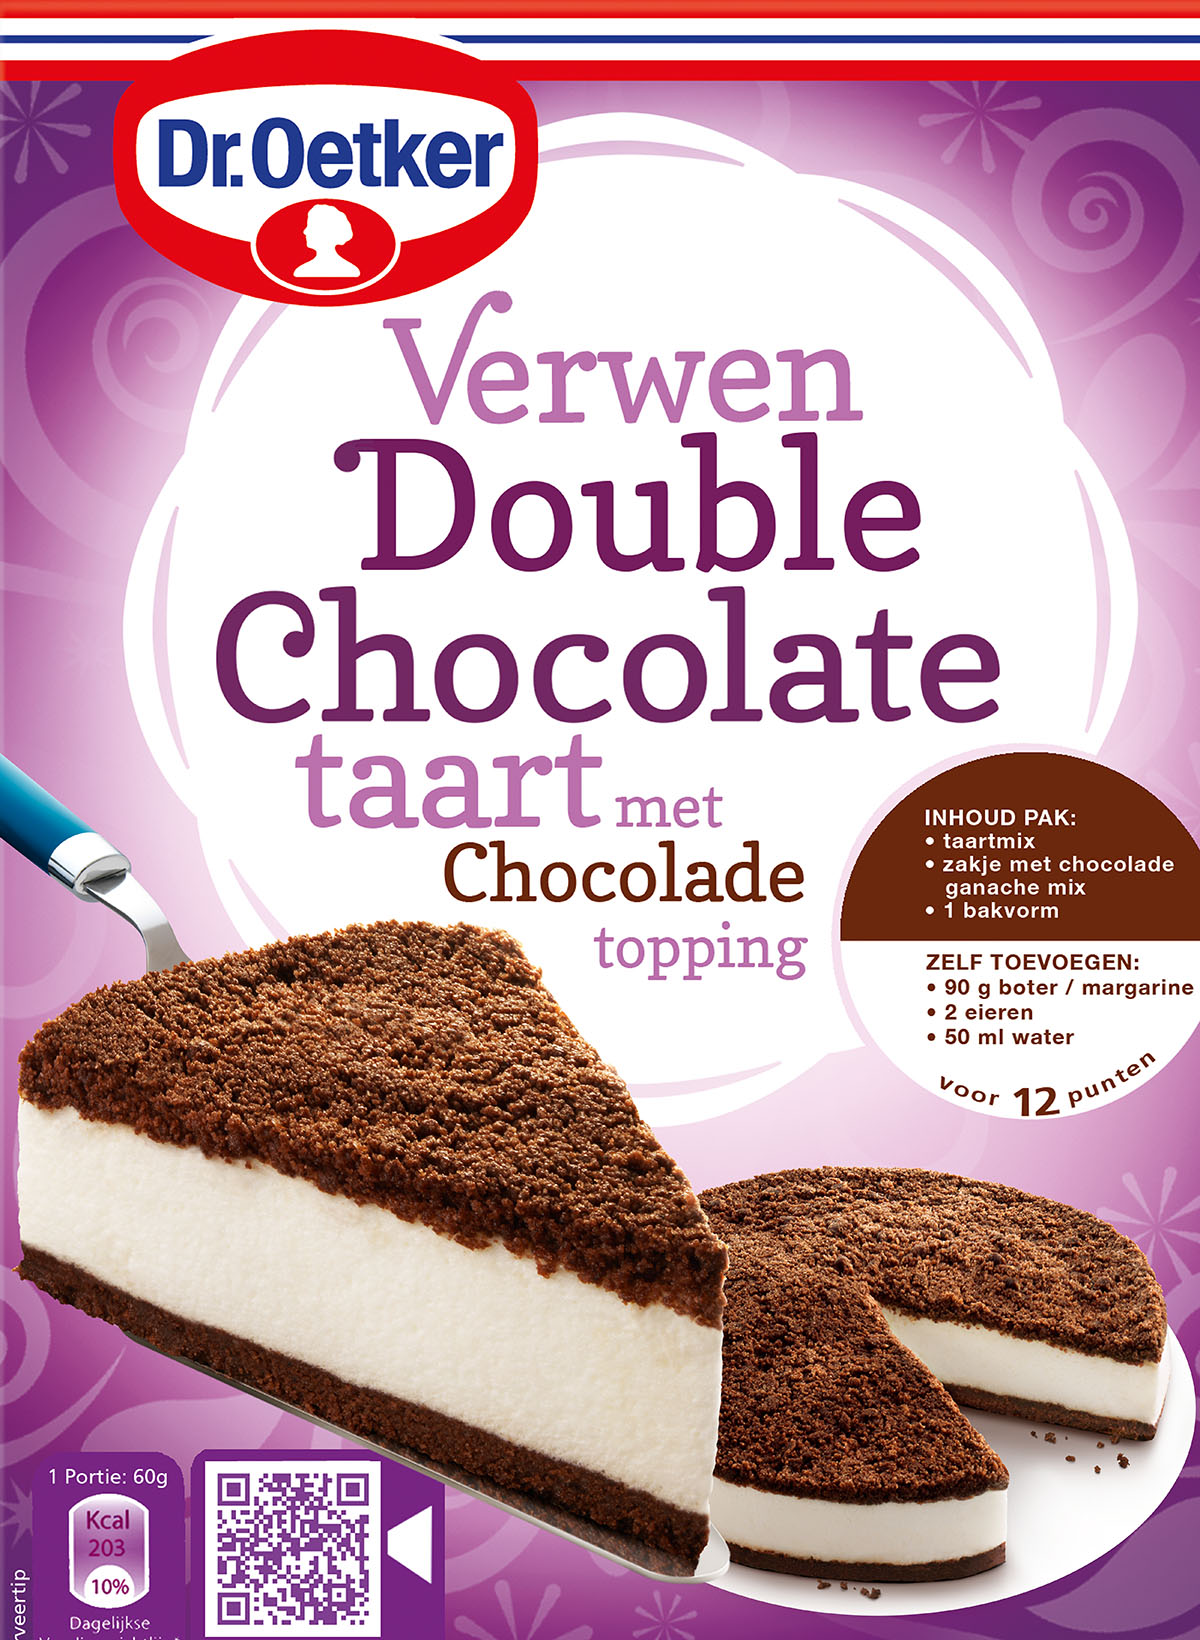 Packaging photography of Dr.Oetker's Double Choclate cake made by Studio_m Photography Amsterdam